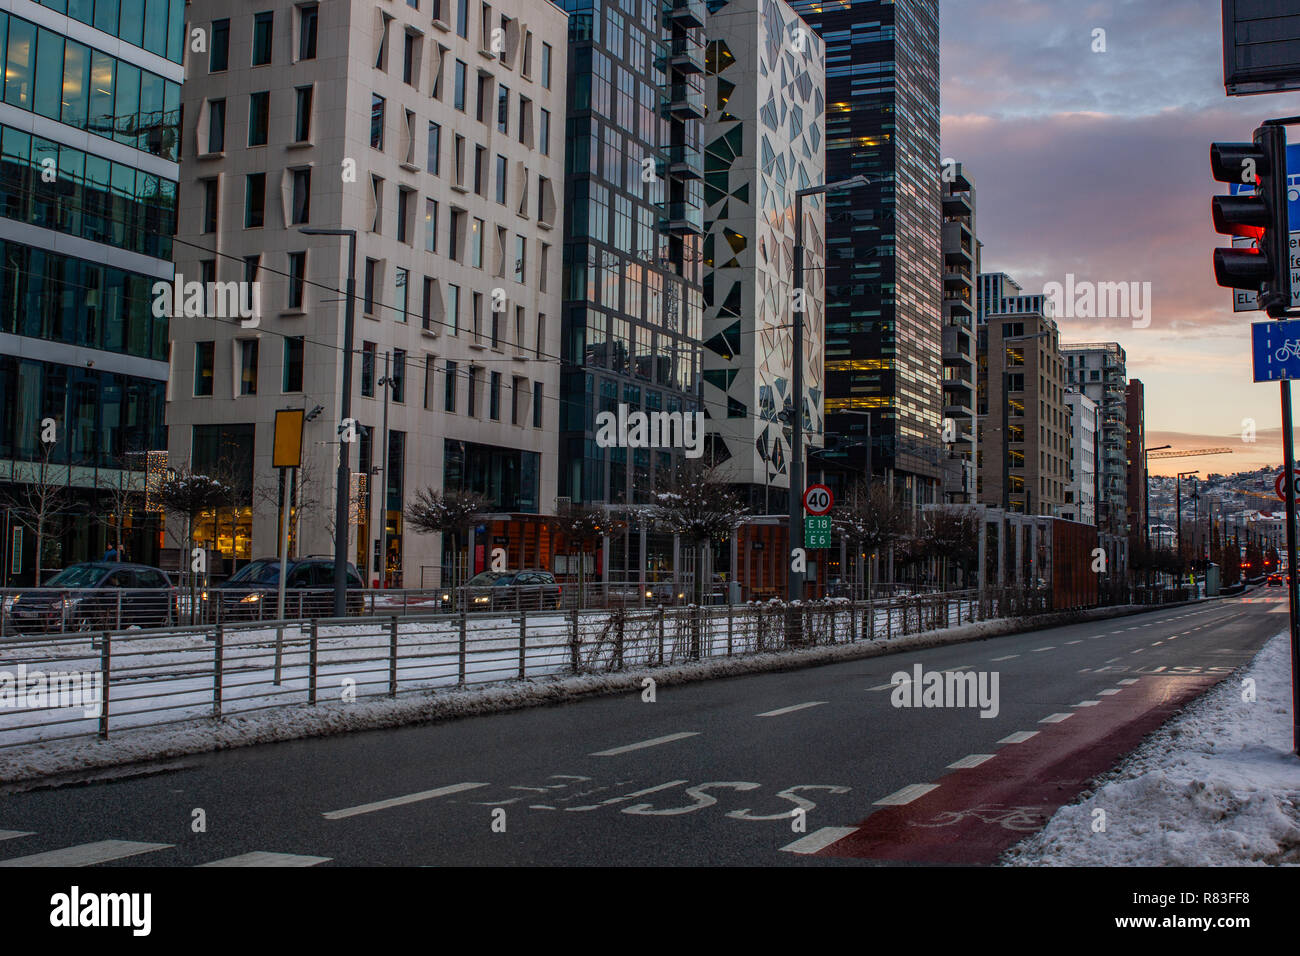 Barcode of Oslo with is modern buildings in Dronning Eufemias Oslo in Norway by sunset Stock Photo Alamy